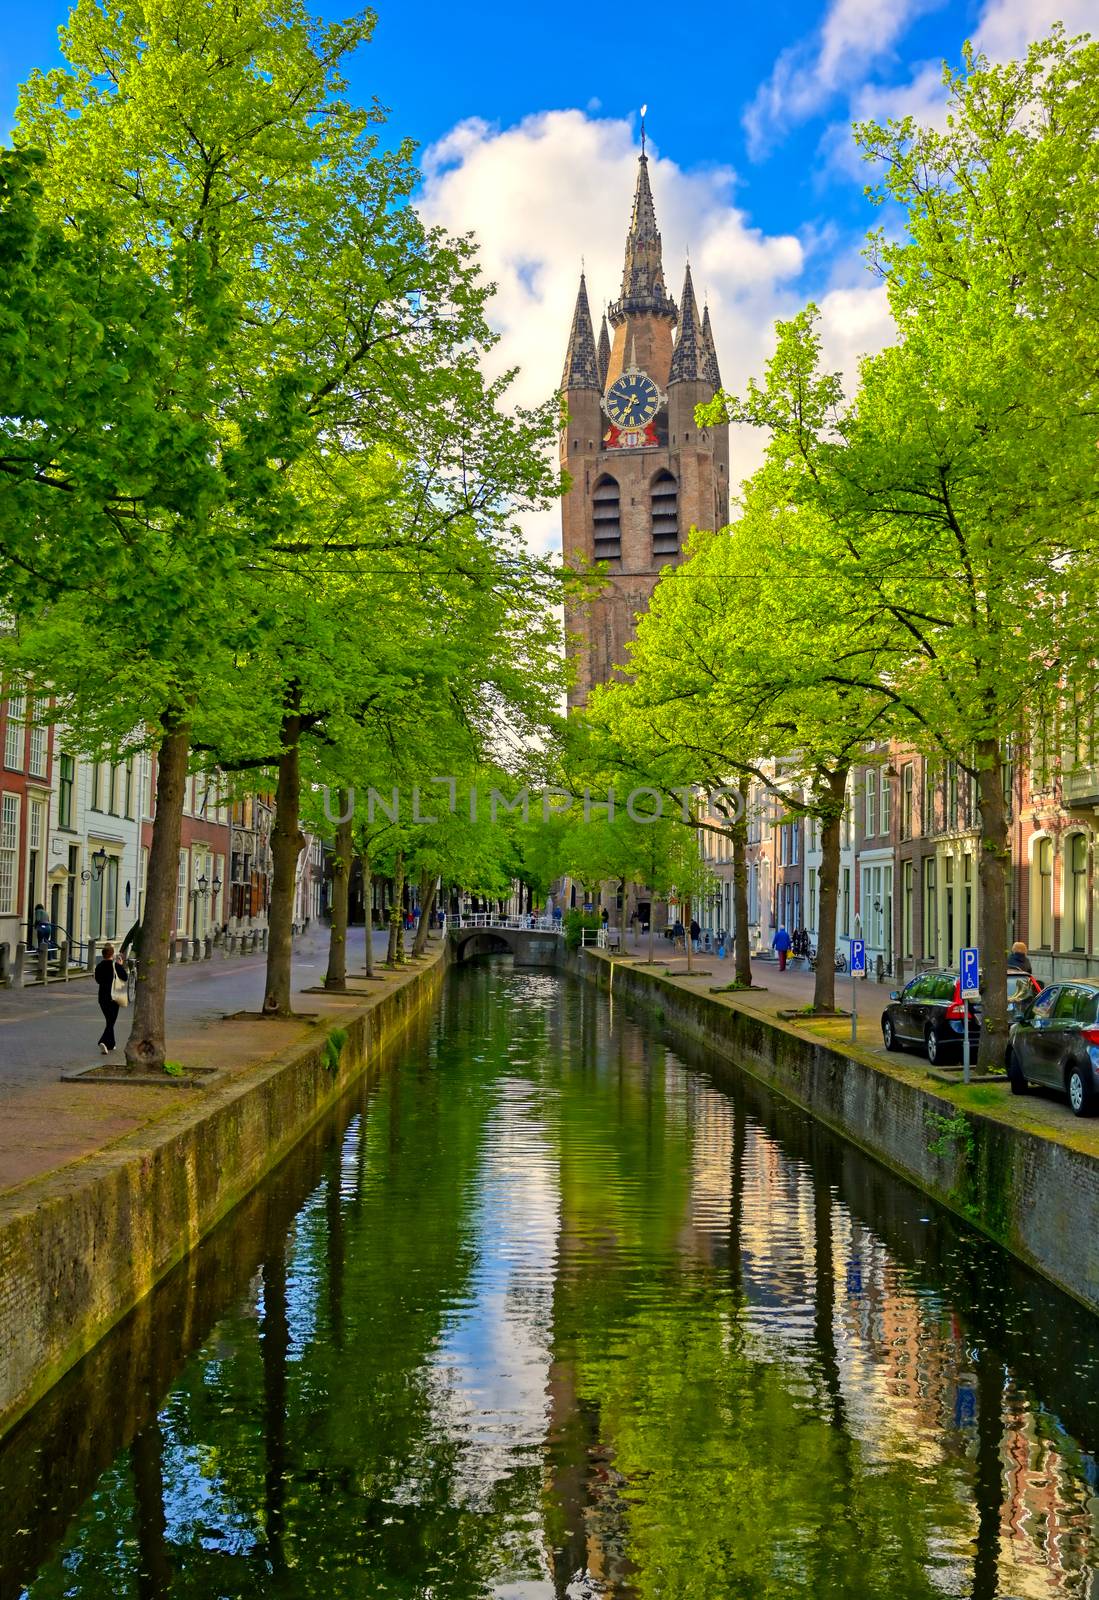 Canal in Delft, Netherlands by jbyard22